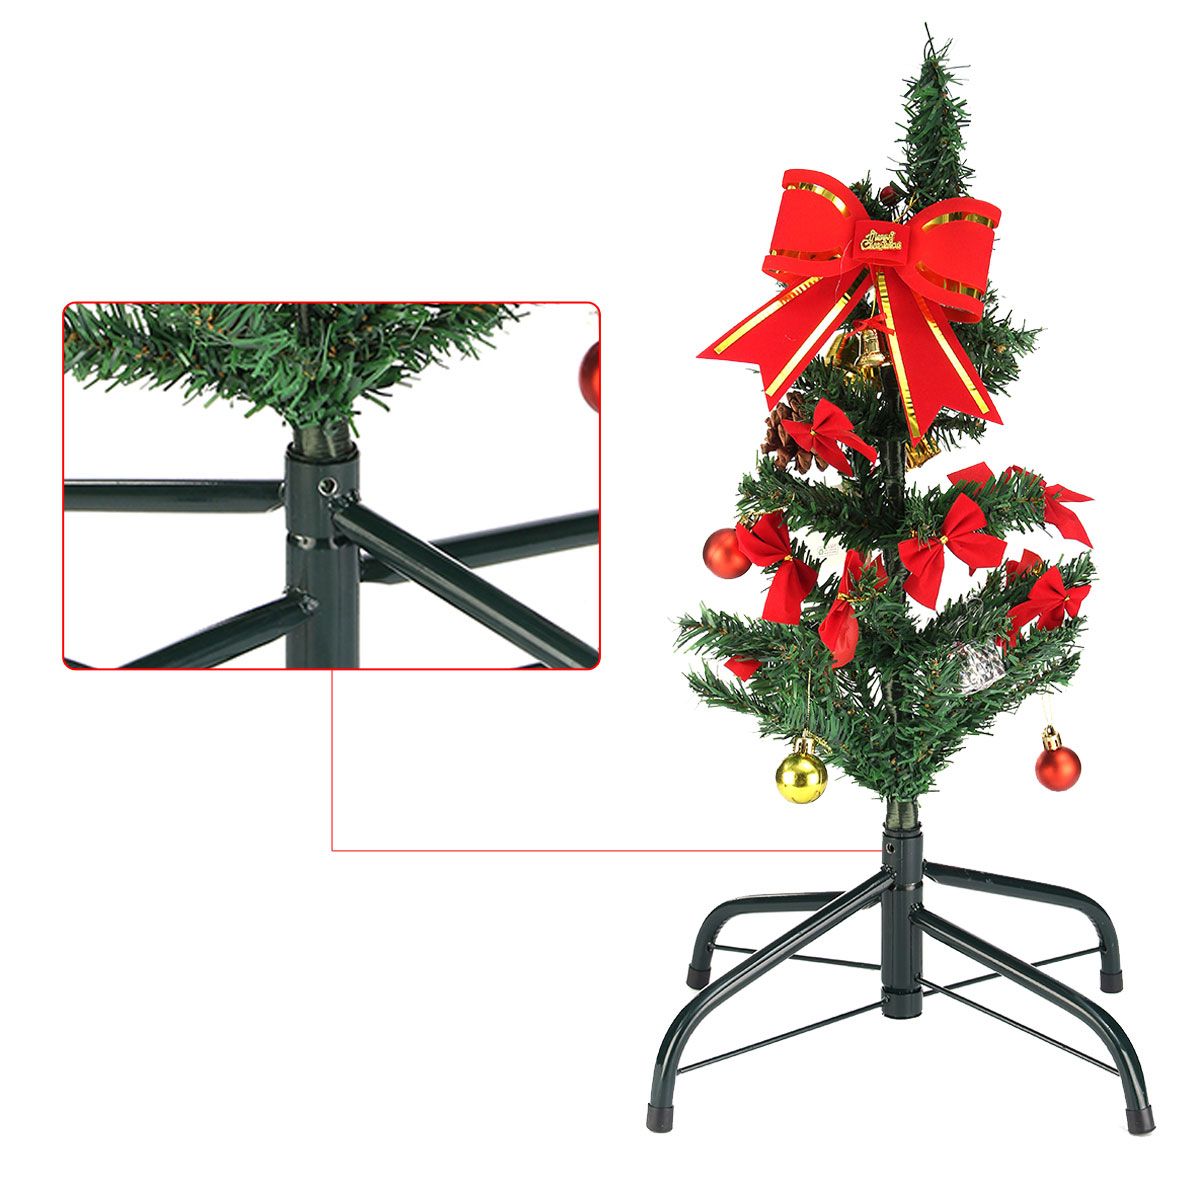 35cm-Cast-Iron-Christmas-Tree-Stand-Green-Metal-Holder-Base-Home-Garden-Decorations-1206264